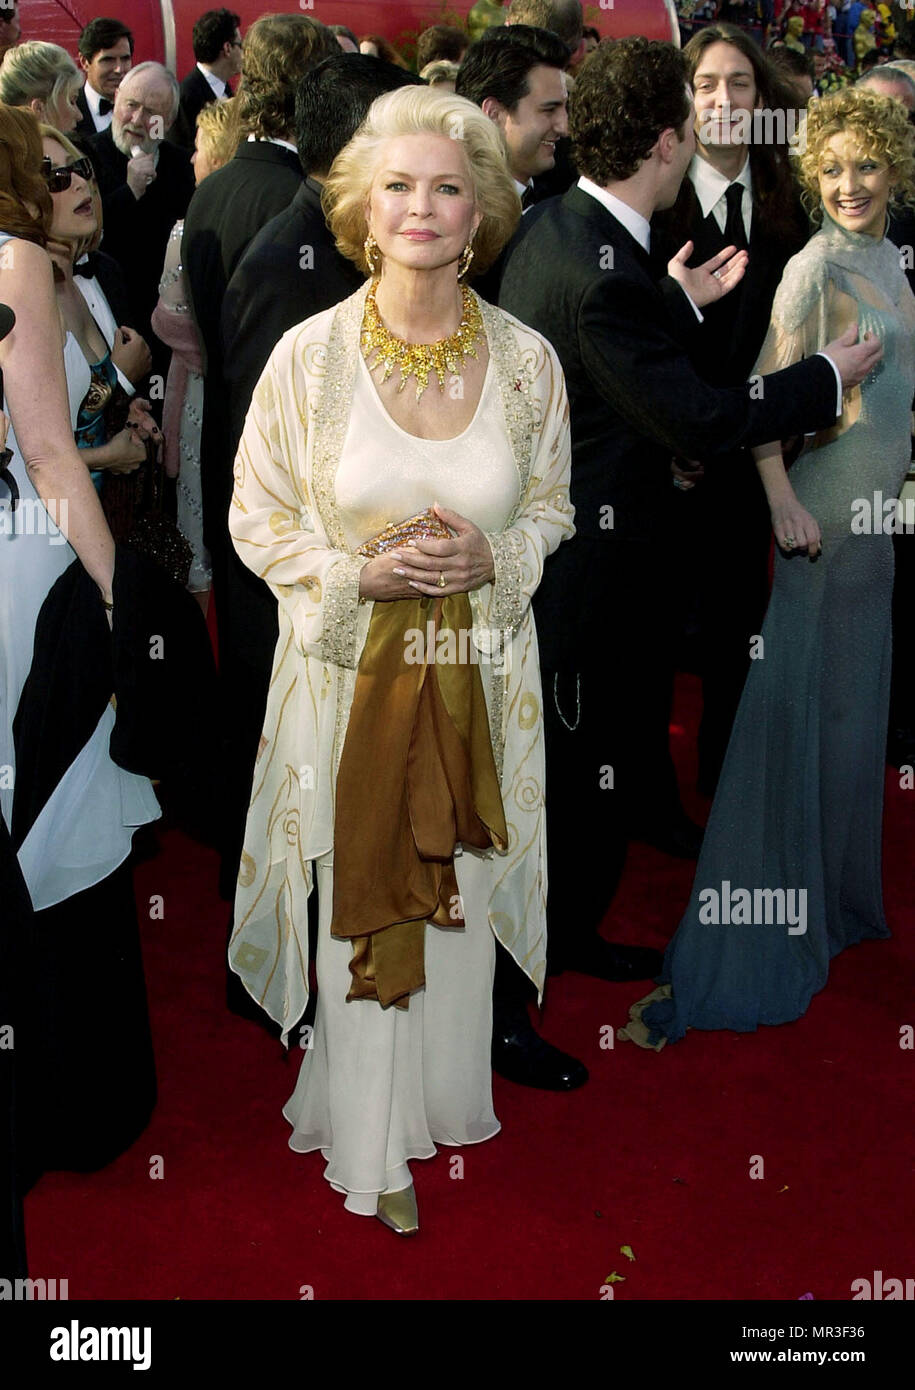 Best Actress nominee for her work in Requiem for a Dream, Ellen Burstyn  arrives at the 73rd Annual Academy Awards at the Shrine Auditorium in Los  Angeles, Sun. March 25, 2001.BurstynEllen14.JPGBurstynEllen14 Red